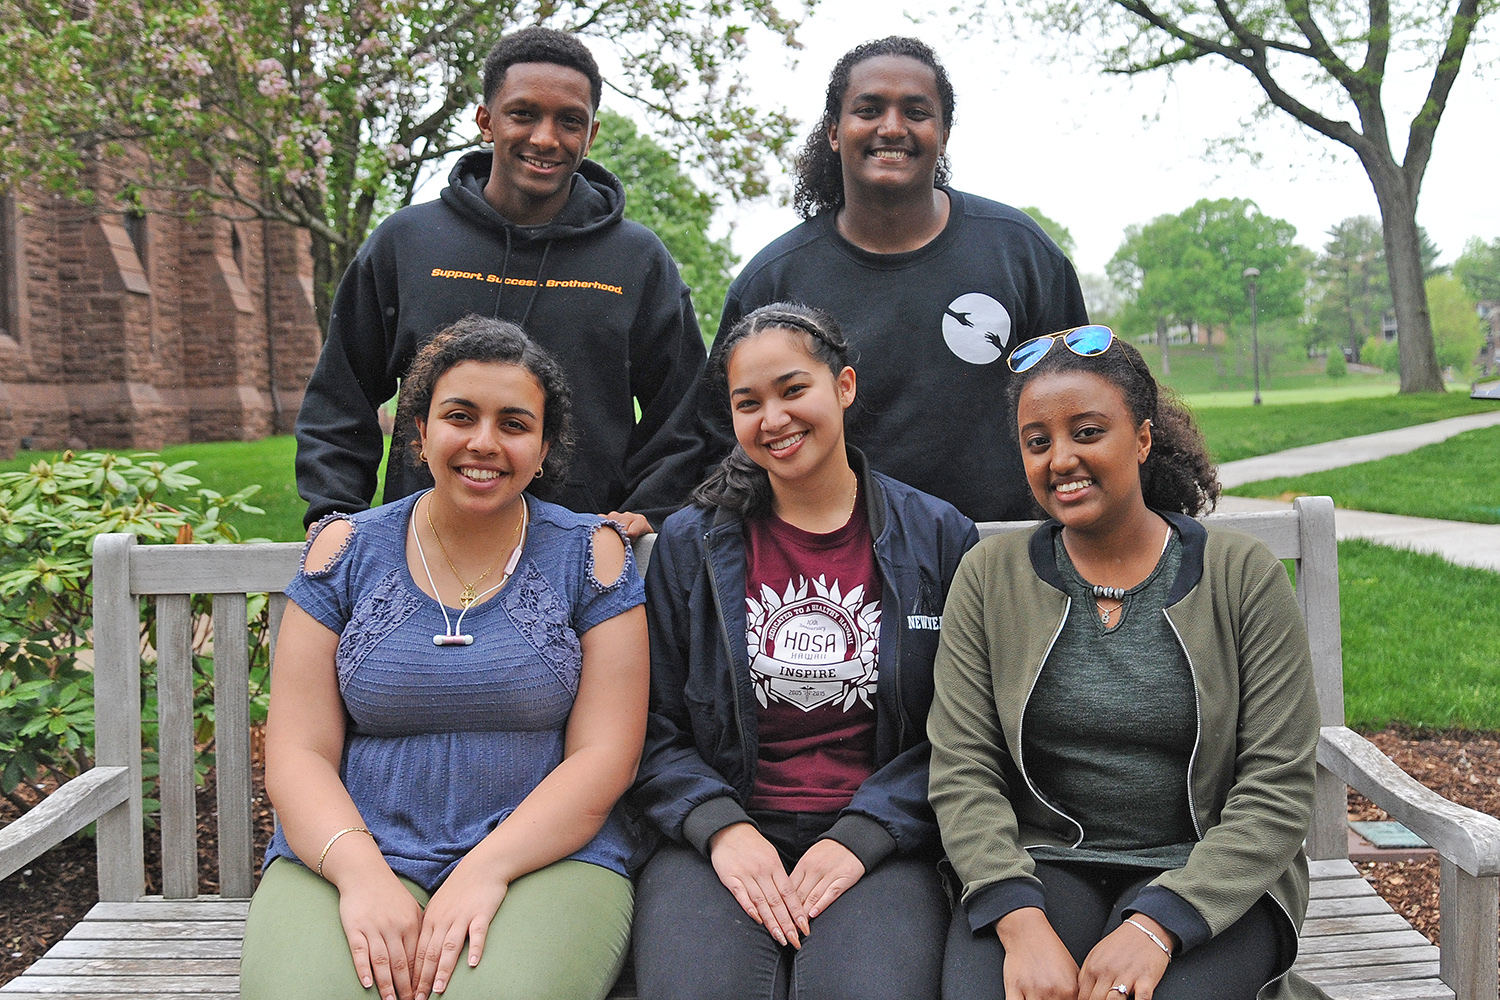 The Rural Access team of Wesleyan students has won a coveted $10,000 Davis Projects for Peace grant. Members (l to r) are: Edelina Marzouk ’20, Momi Afelin ’20, Betty Bekele ’20, Emanuel Fetene ’21, Nebiyu Daniel ’18